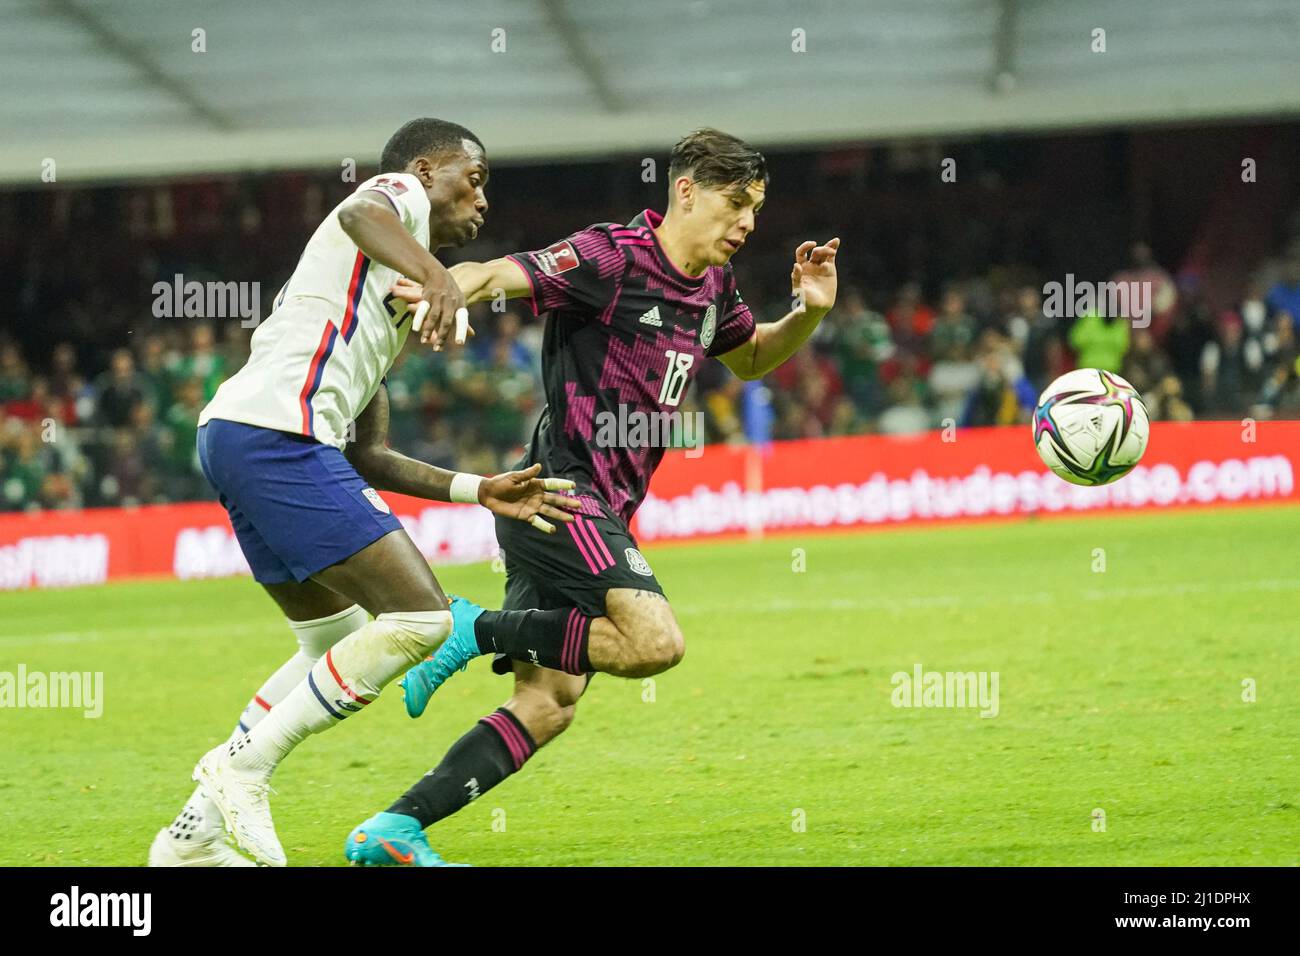 Mexico City, Mexico, March 24, 2022,  Mexico Defender Gerardo Daniel Arteaga Zamora #18 fight to keep the ball during the 2022 World Cup Qualifier at Allianz Field.  (Photo Credit:  Marty Jean-Louis) i Stock Photo